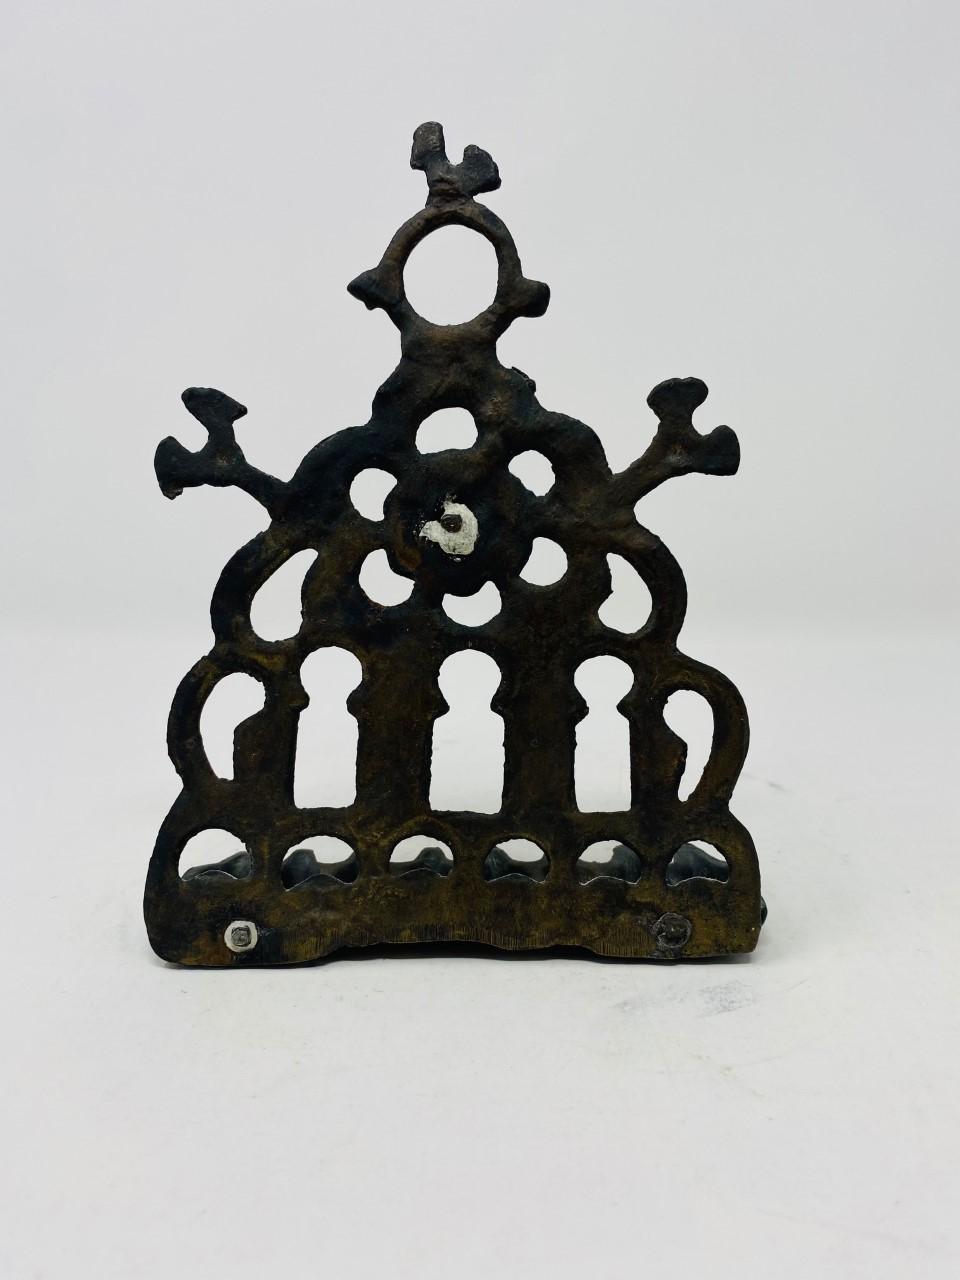 Beautiful vintage hannukah menorah. This piece is cast brass that has aged beautifully with an ornate design that is beautiful and inspiring. The patina on this piece is beautiful and adds character to the piece.
Primitive, East Coast, Hollywood